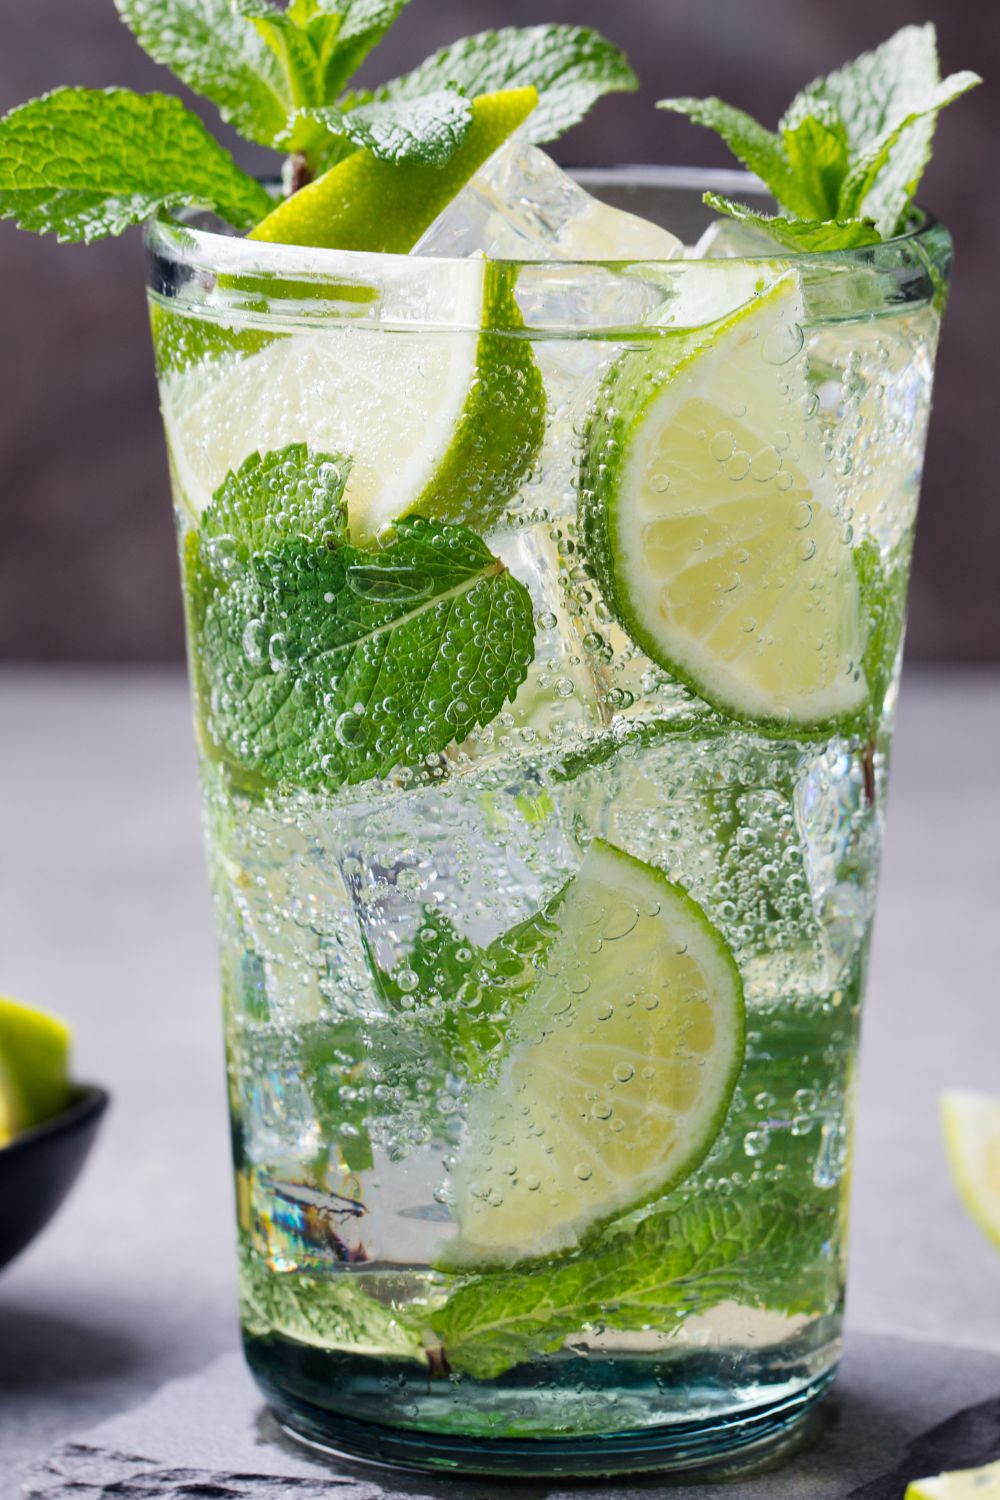 A glass filled with mojito, limes and mint leaves